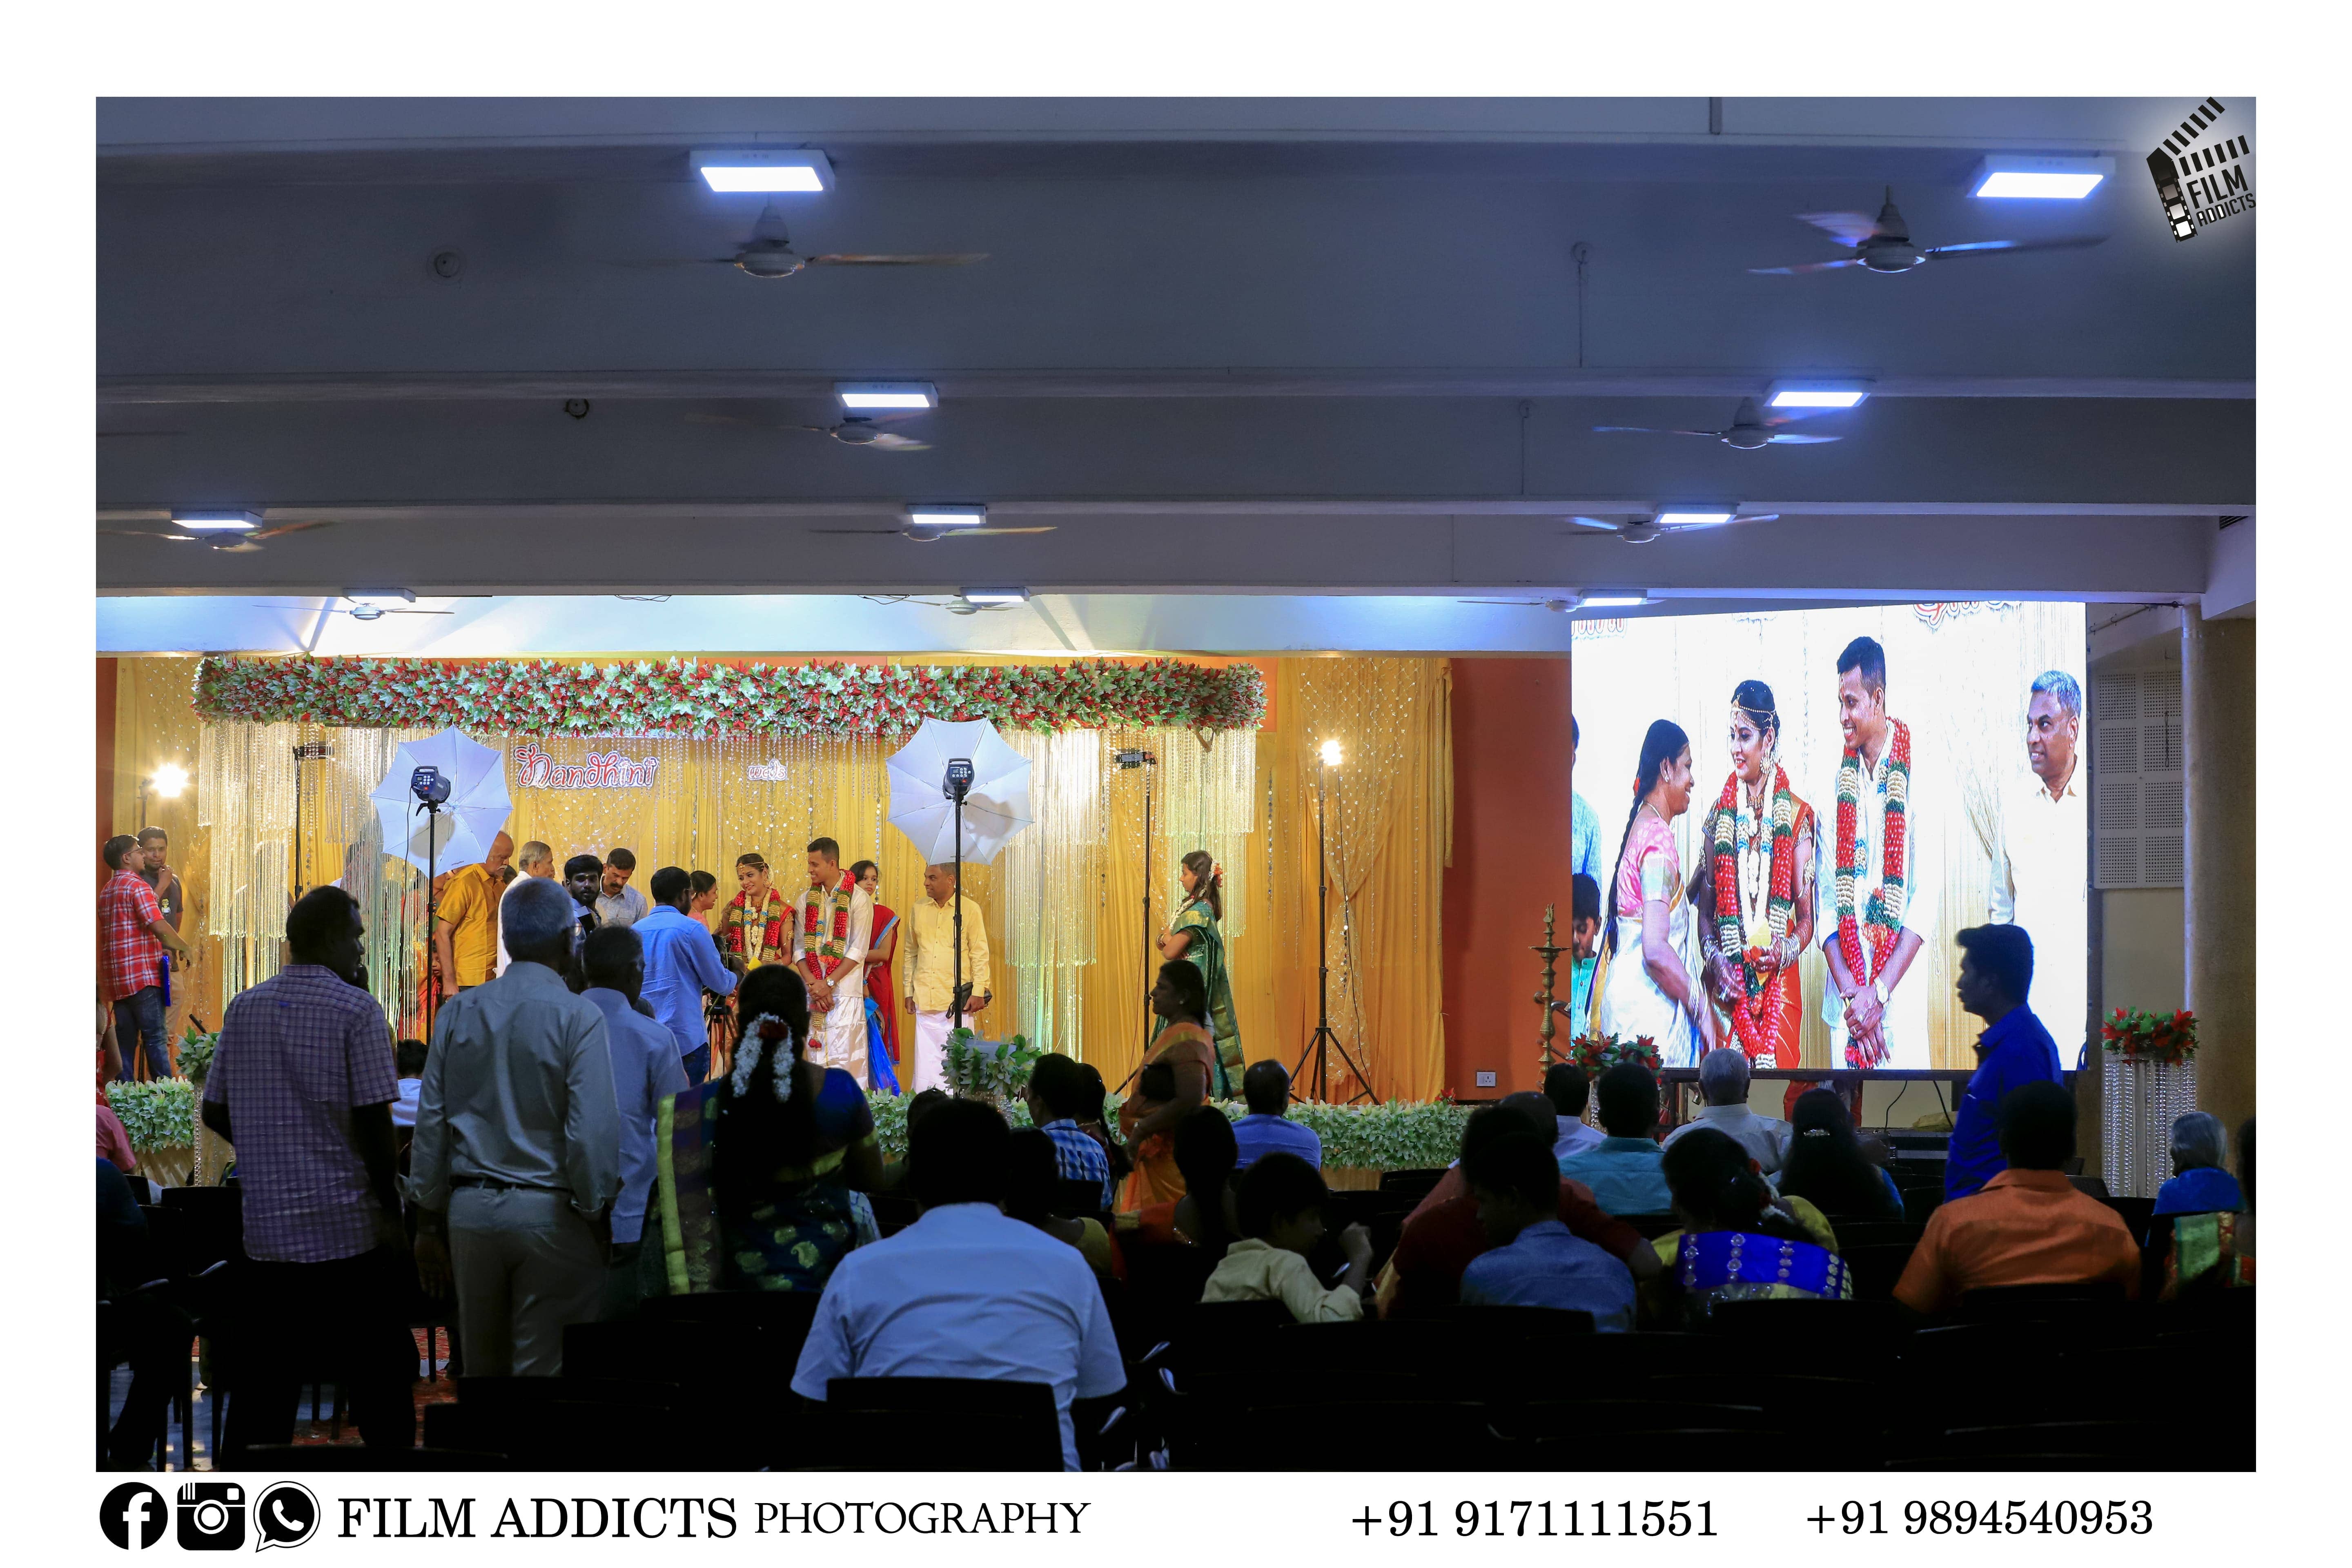 Led wall in Coimbatore, Led wall rental in Coimbatore, Led wall display in Coimbatore, Led wall wedding in Coimbatore, Led wall for wedding reception, Led wall event in Coimbatore, Led wall event management in Coimbatore, Led video wall for events in Coimbatore, led video wall rental in Coimbatore, wedding led video wall rental & hiring Coimbatore, marriage led video wall rental & hiring in Coimbatore, wedding led screen rental Coimbatore, marriage led screen Coimbatore, indoor & outdoor led video wall in Coimbatore, led wall in marriage, led wall rental in Coimbatore, led rental, led video wall hiring Coimbatore, marriage led screen, wedding led screen rental,live streaming in Coimbatore, live streaming, live tv, live streaming wedding, wedding live streaming Coimbatore, marriage live streaming Coimbatore, live streaming services in Coimbatore, live streaming wedding Coimbatore.